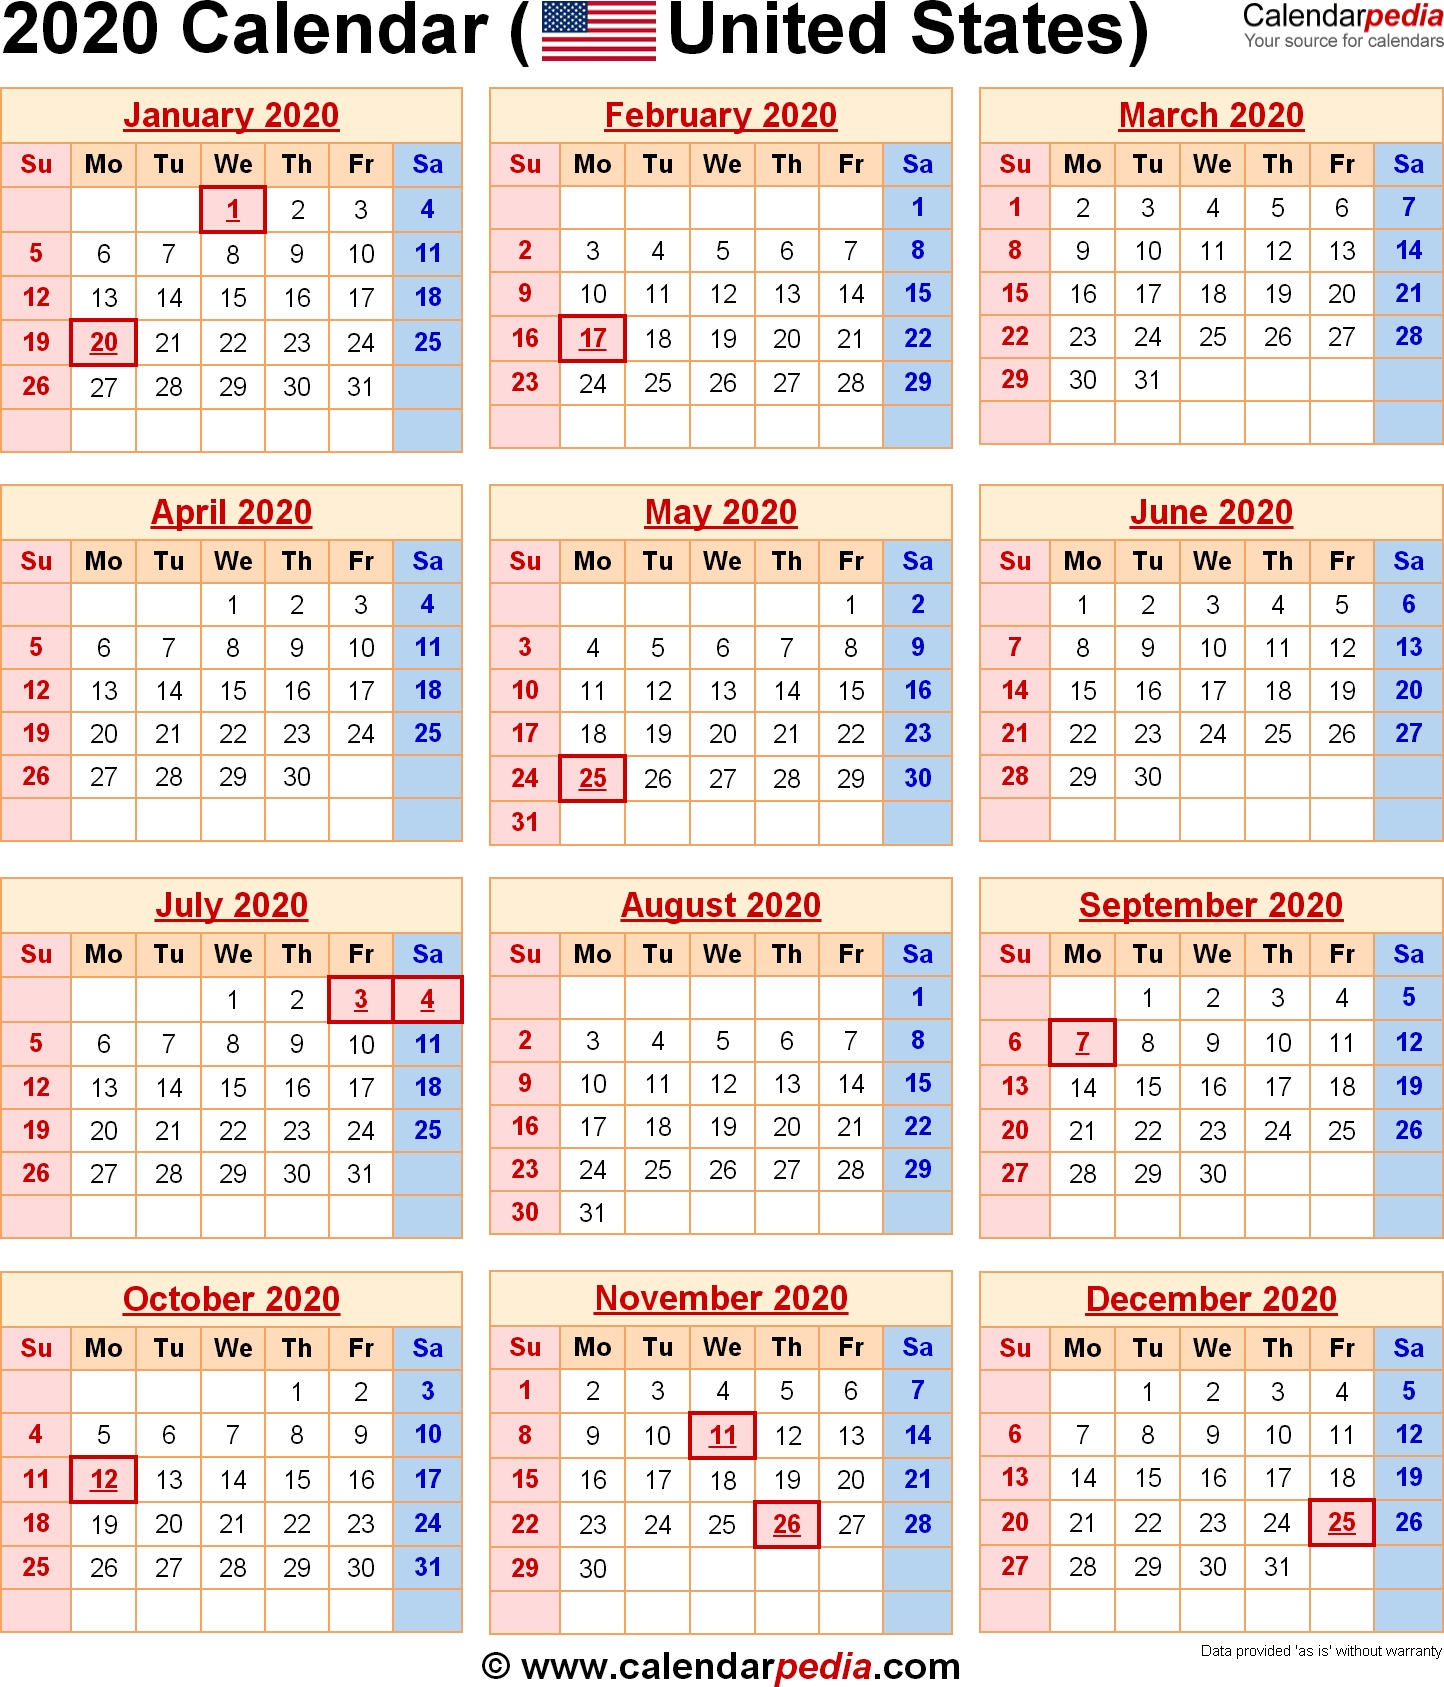 2020 Calendar With Holidays In Word - Colona.rsd7 Calendar Showing Holidays For 2020